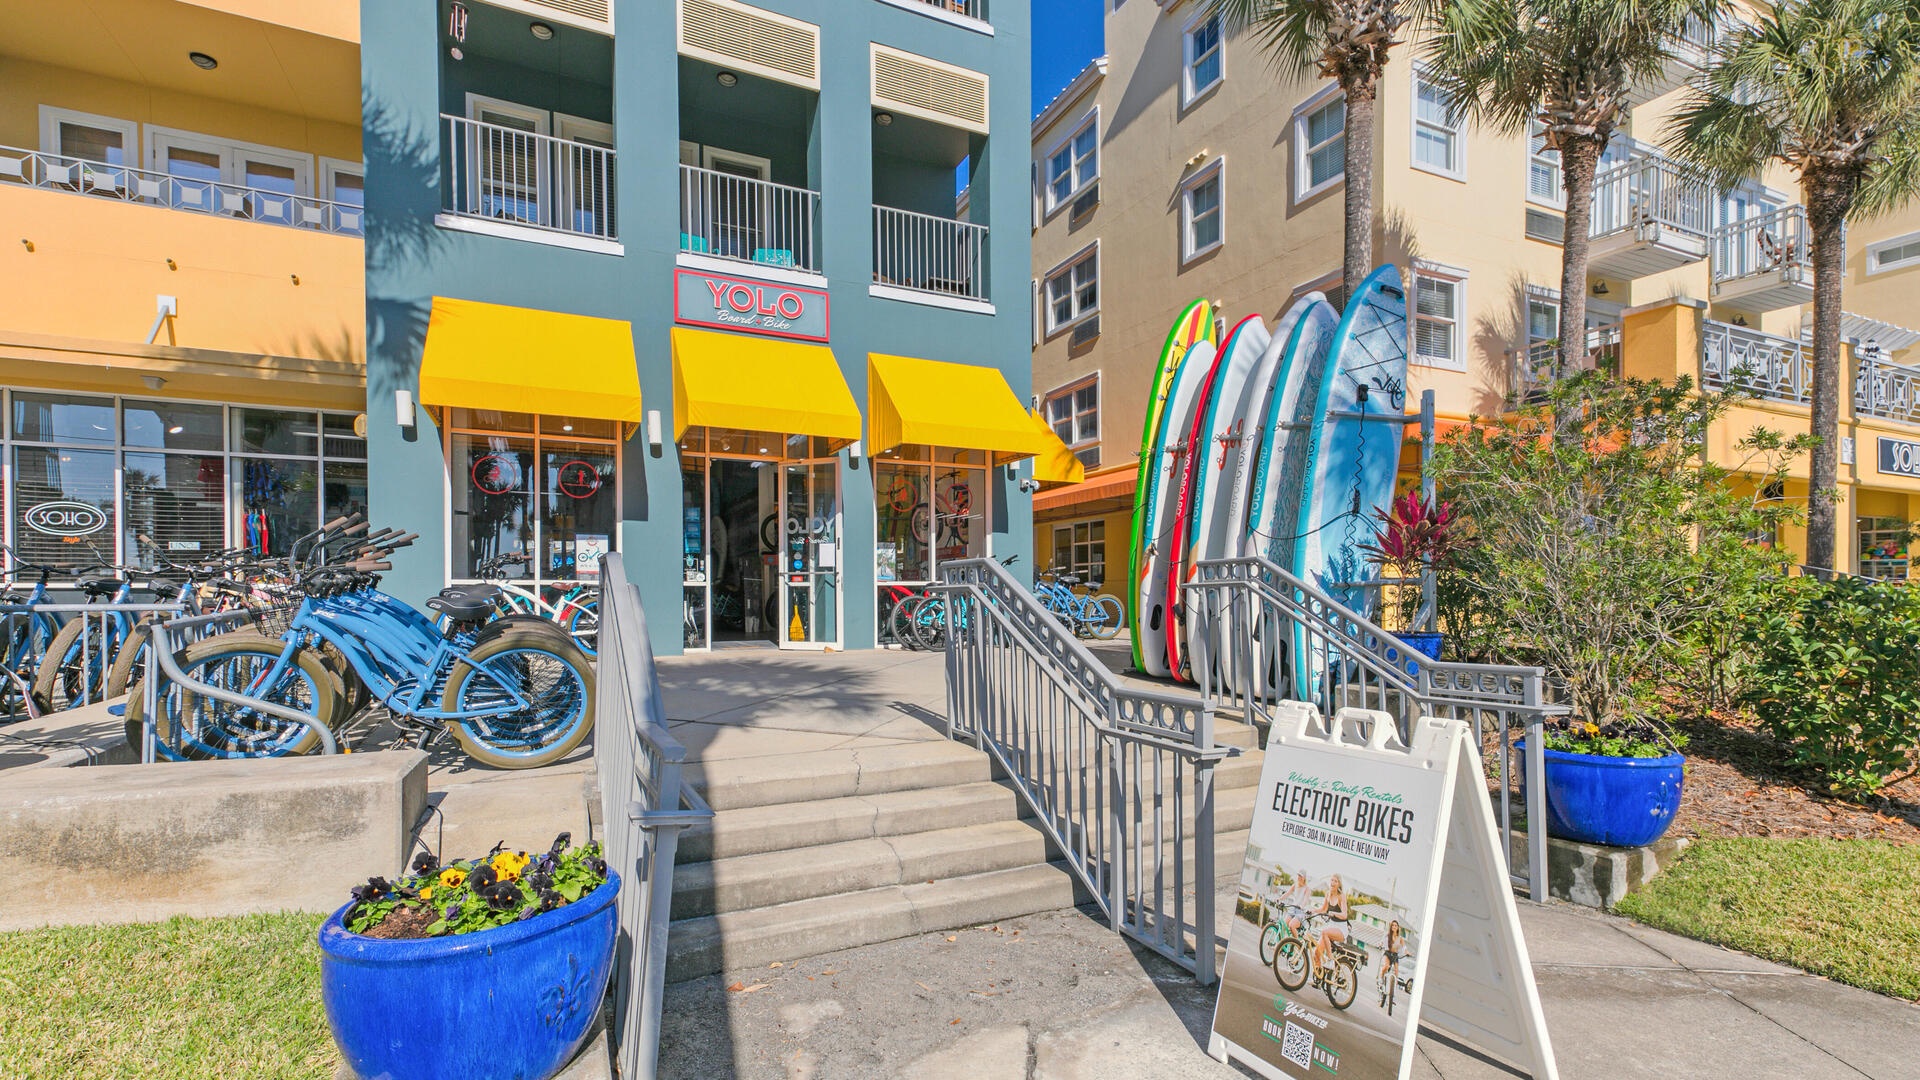 Shopping, dining, activities and more at nearby Gulf Place!